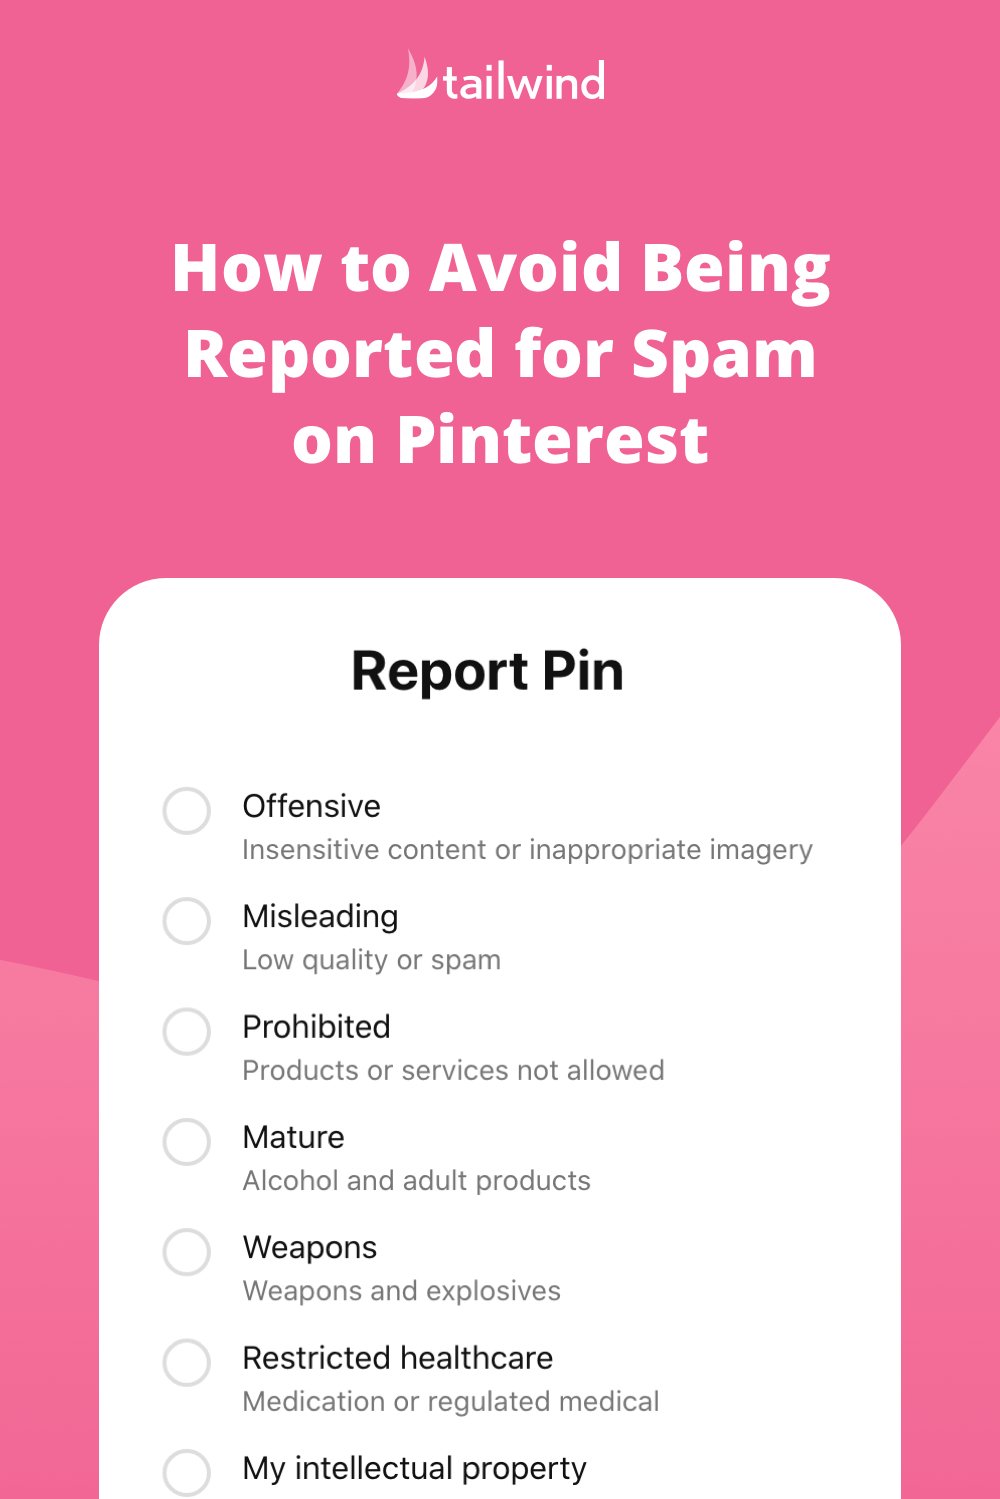 How To Avoid Being Reported For Pinterest Spam In 2021